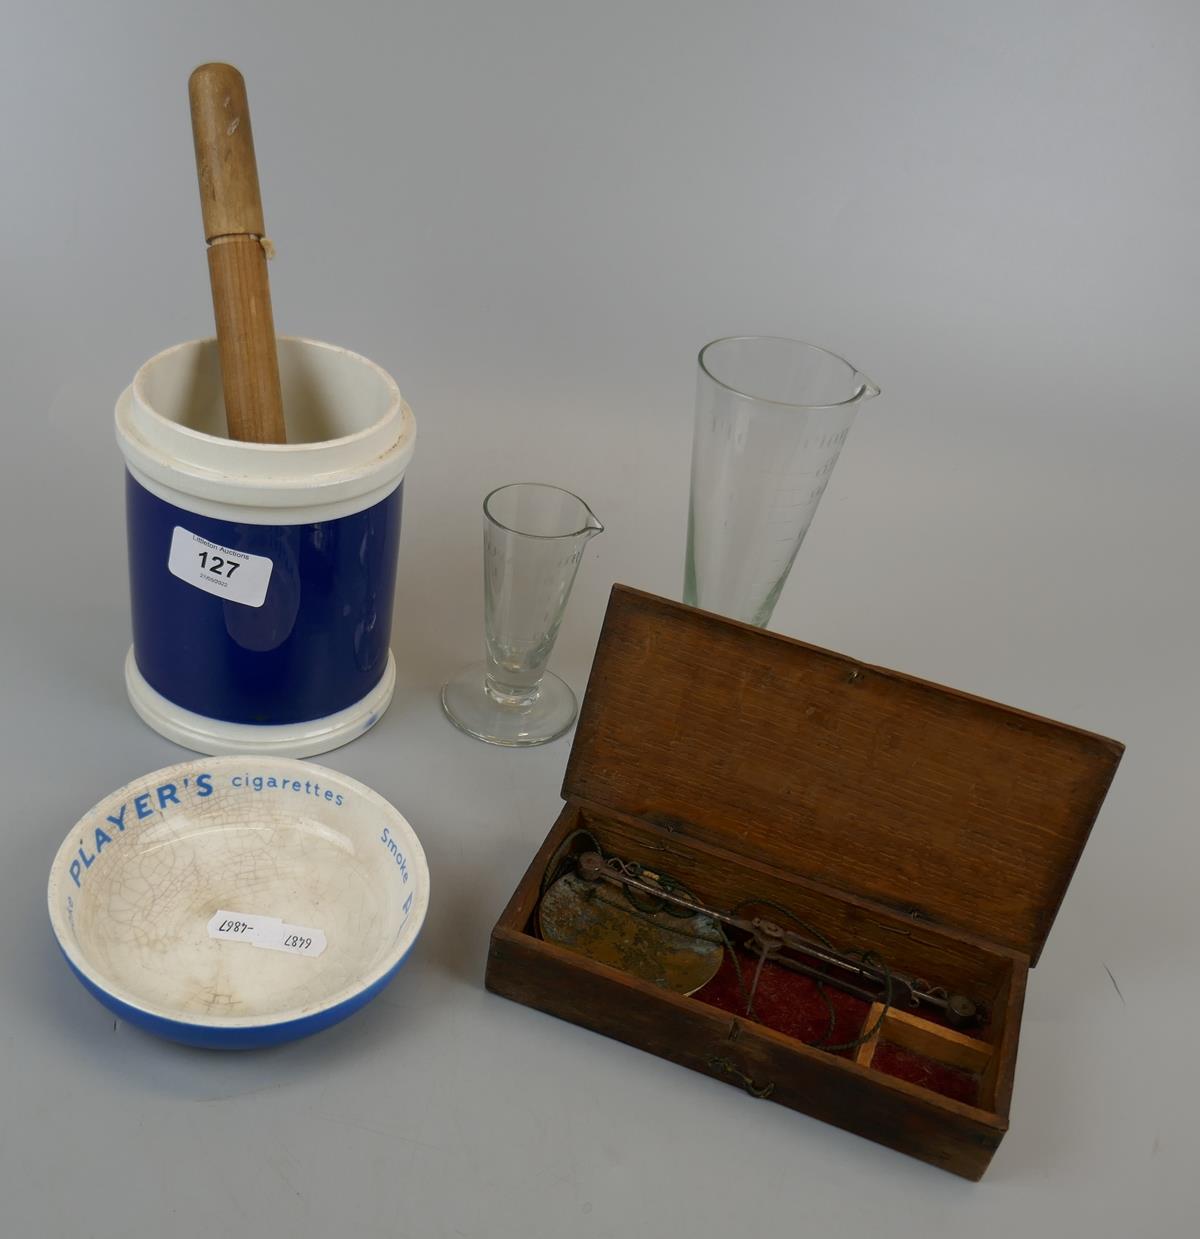 Scales, measuring jars, thermometer and ashtray.